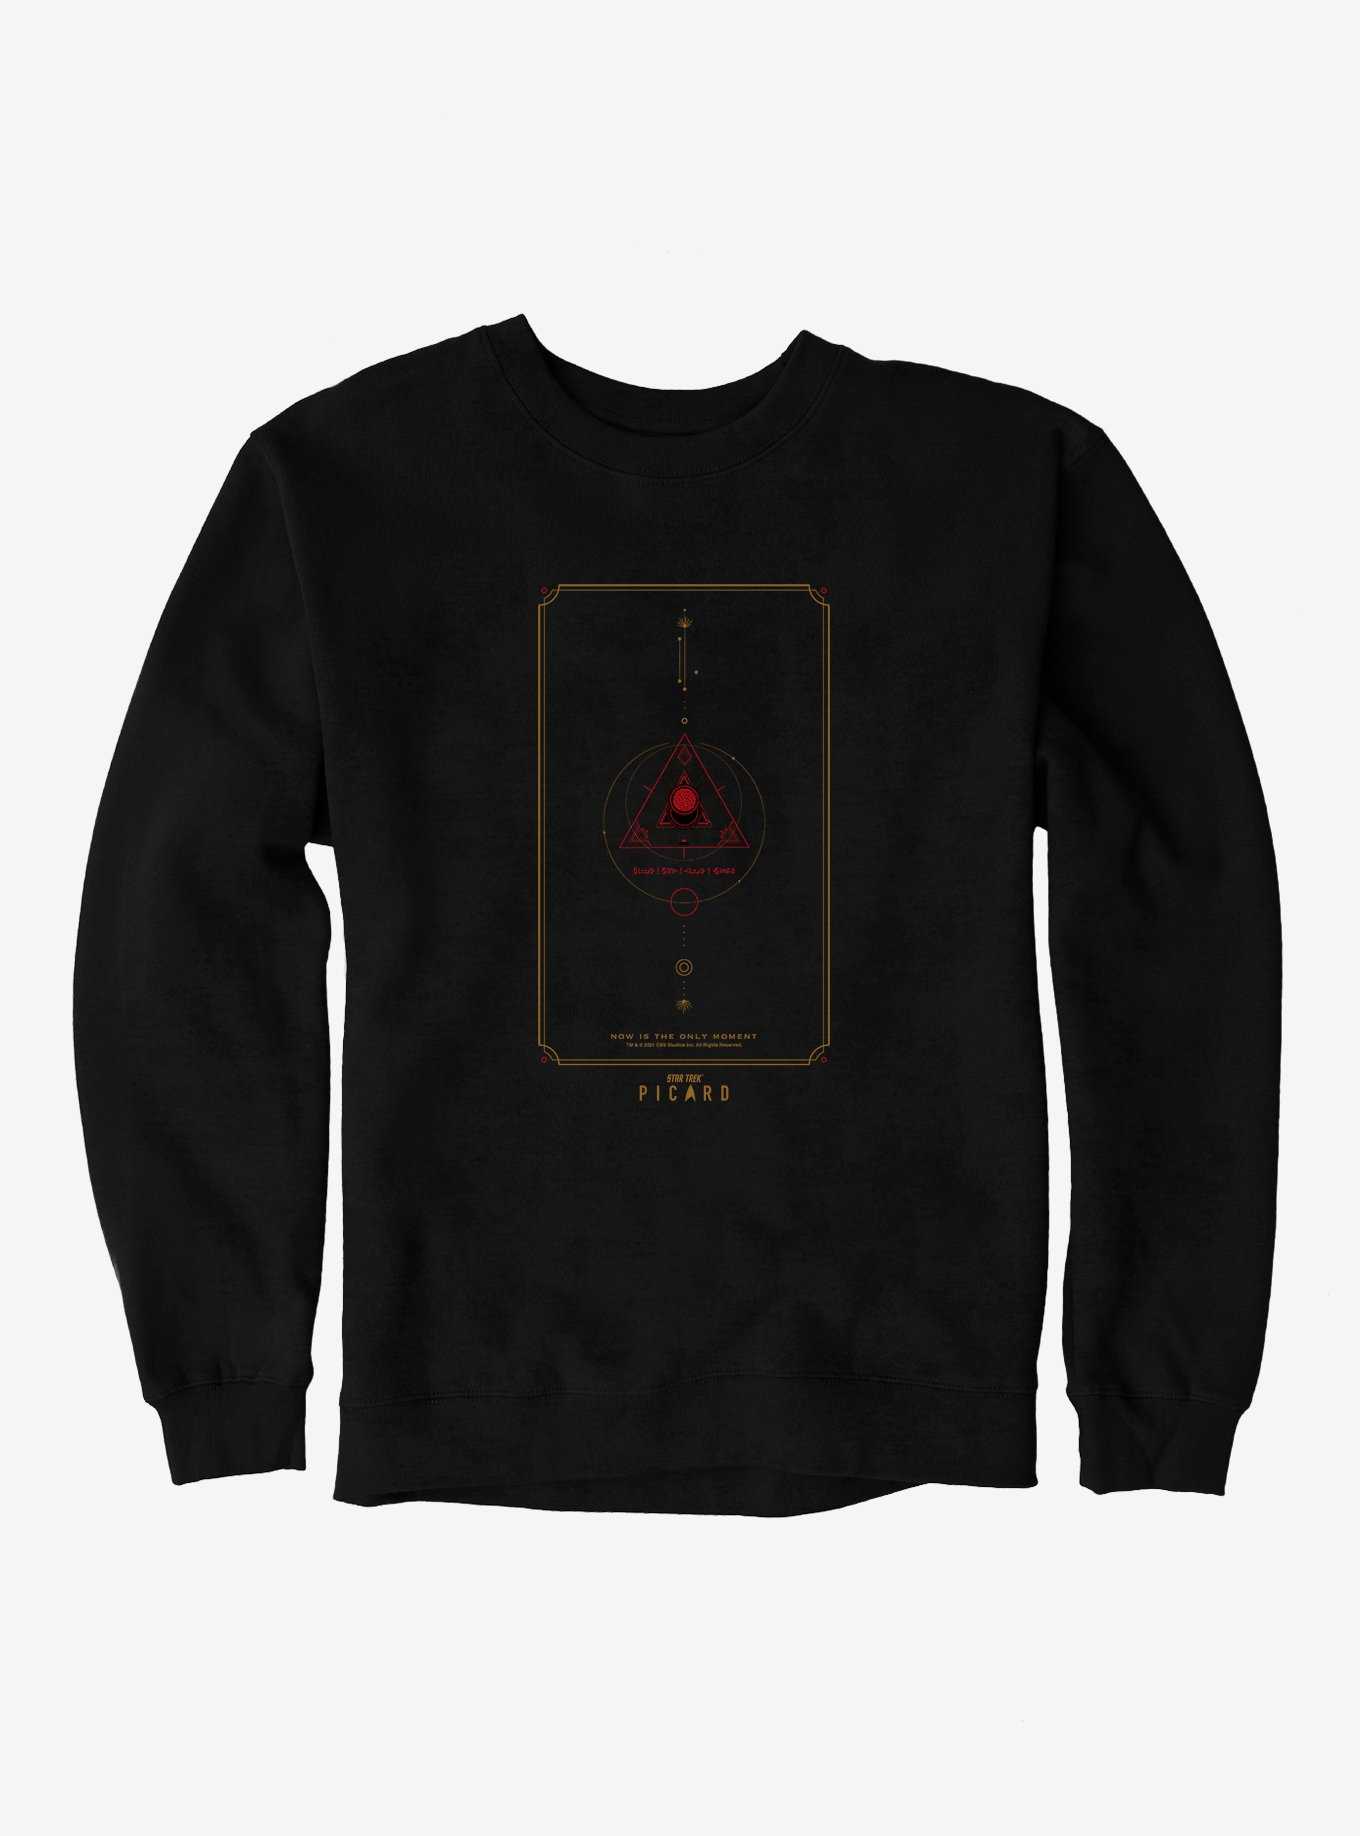 Star Trek: Picard Now Is The Only Moment Sweatshirt, , hi-res